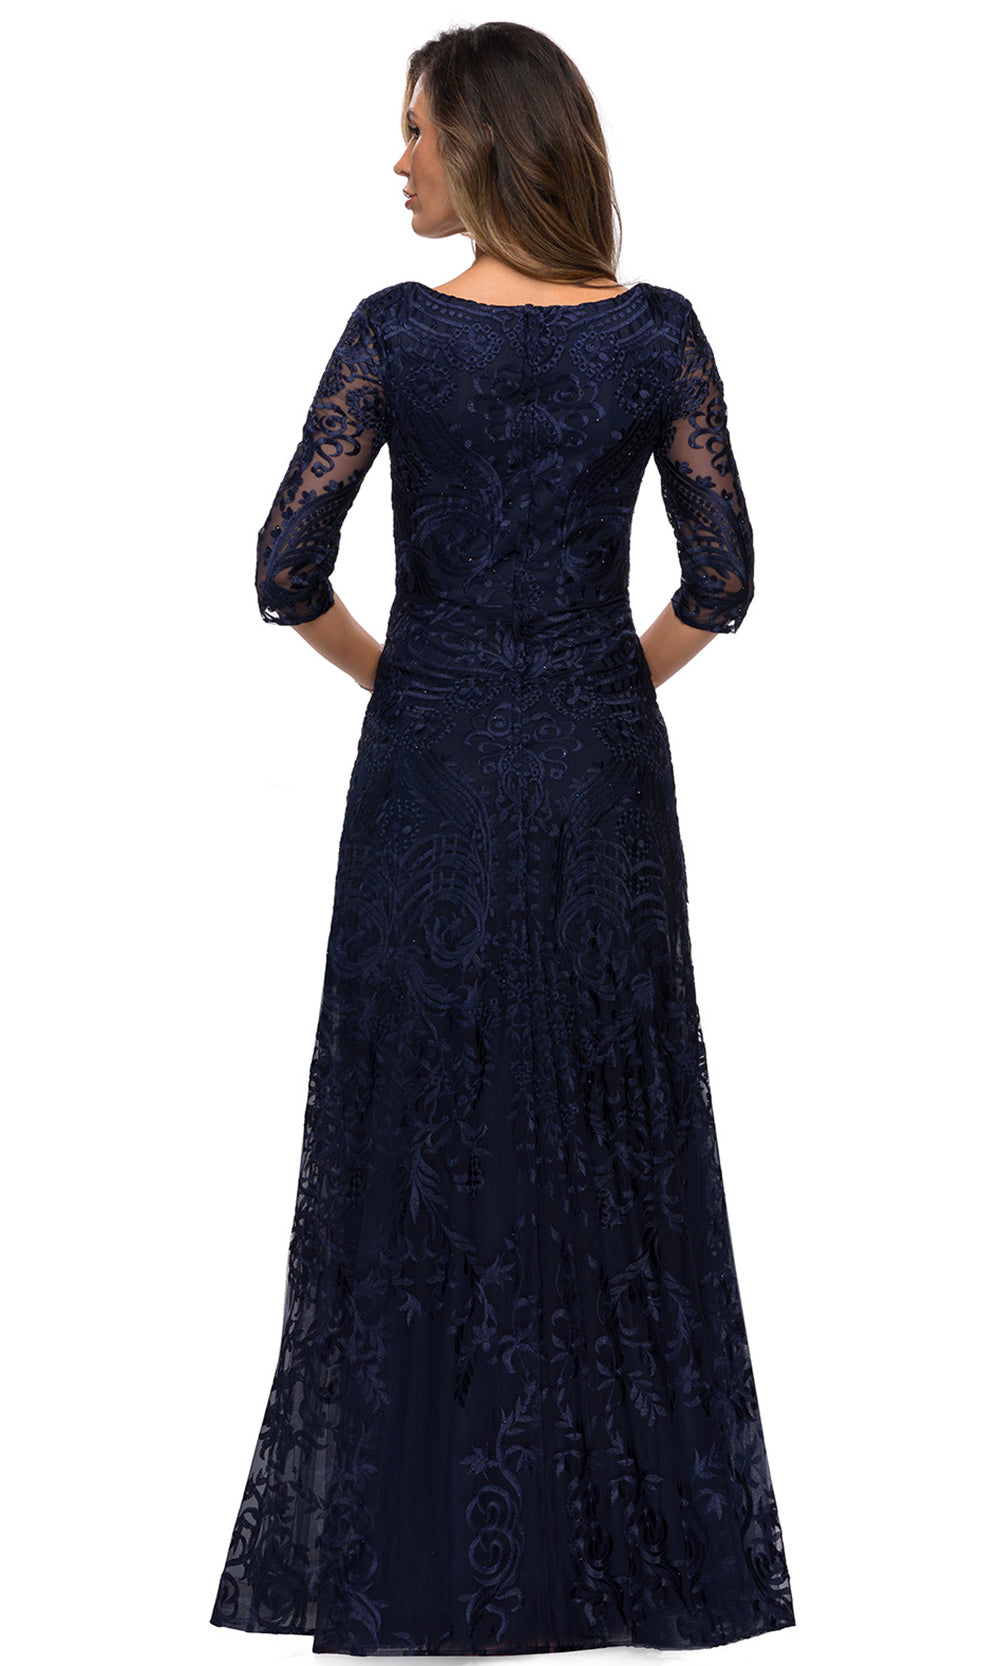 La Femme - 27949 Quarter Length Sleeve Embroidered Lace A-Line Gown In Blue